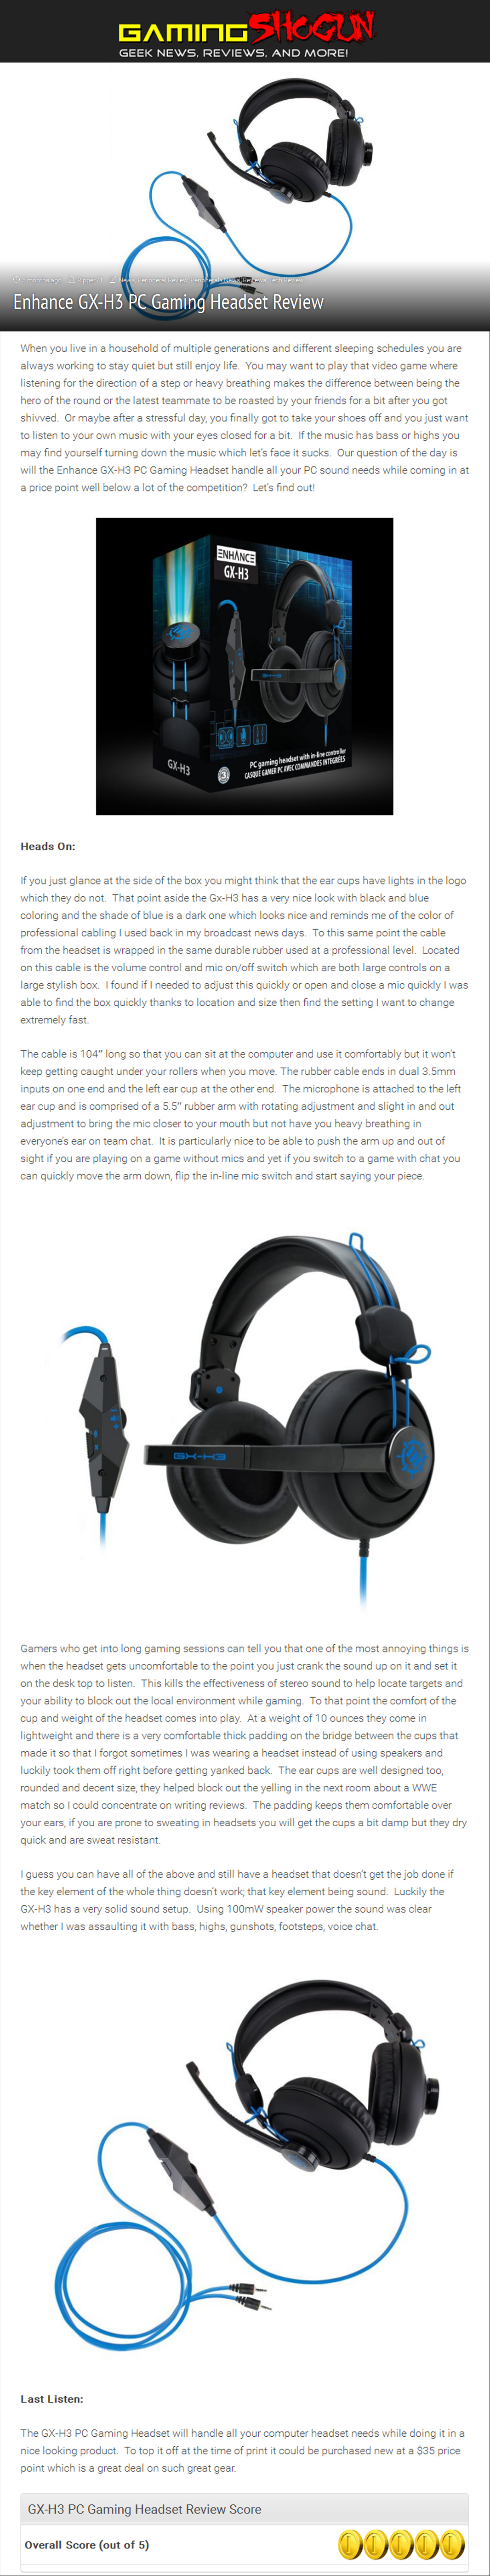 Enhance GX-H3 PC Gaming Headset Review